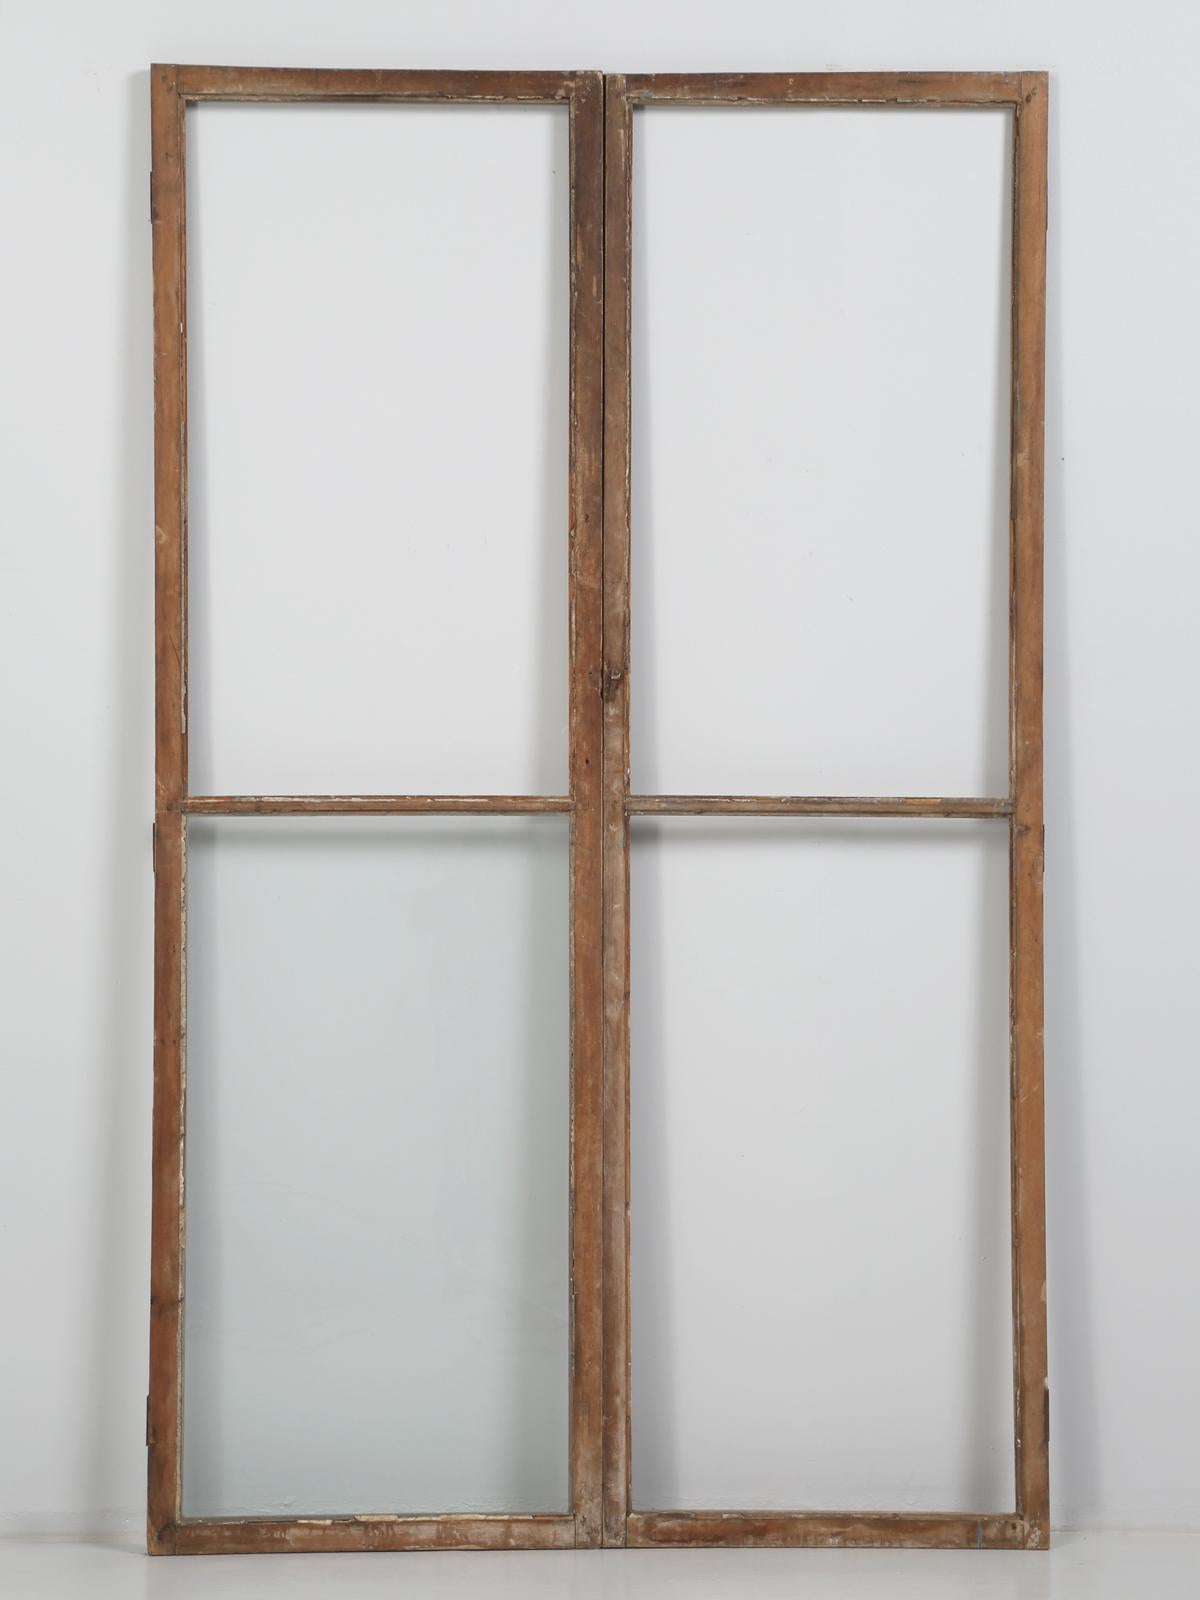 Antique French Wood and Glass Doors 3